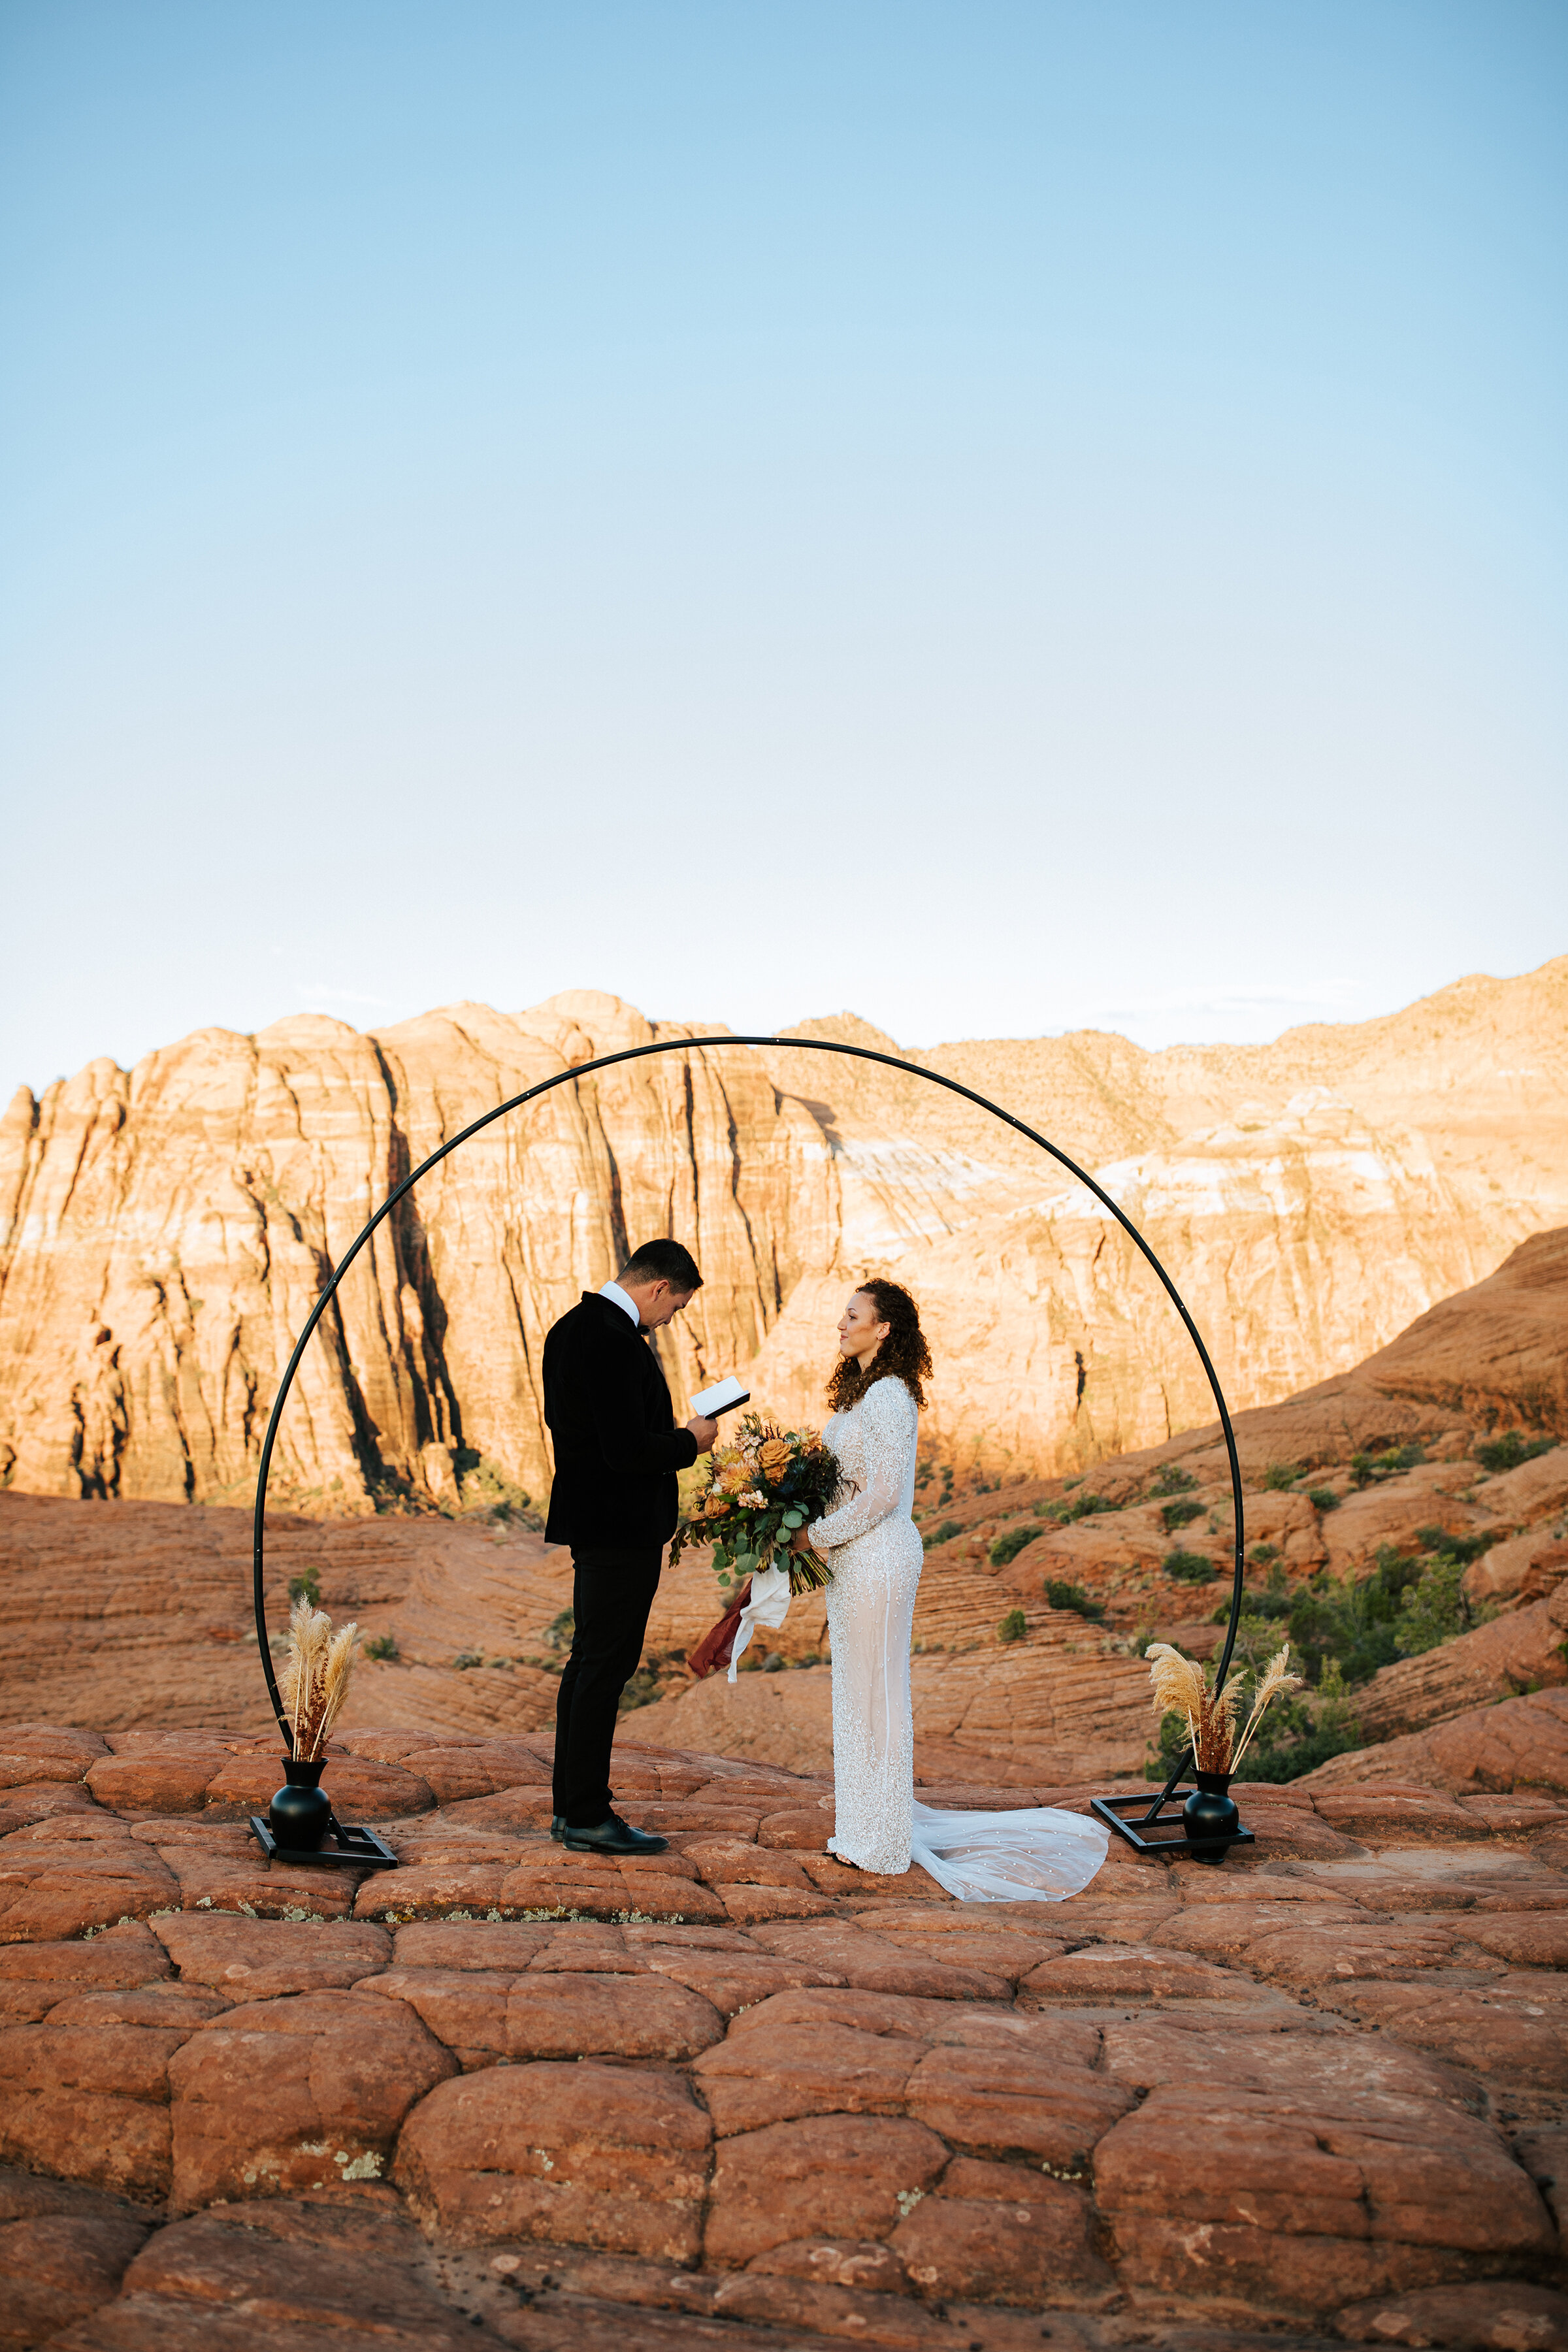  A beautiful couple exchange rings under a stunning circle arch in the Utah desert in a beautiful elopement styled photo shoot by professional Utah photographer Emily Jenkins Photography. Wedding arch inspiration ideas and goals outdoor wedding cerem